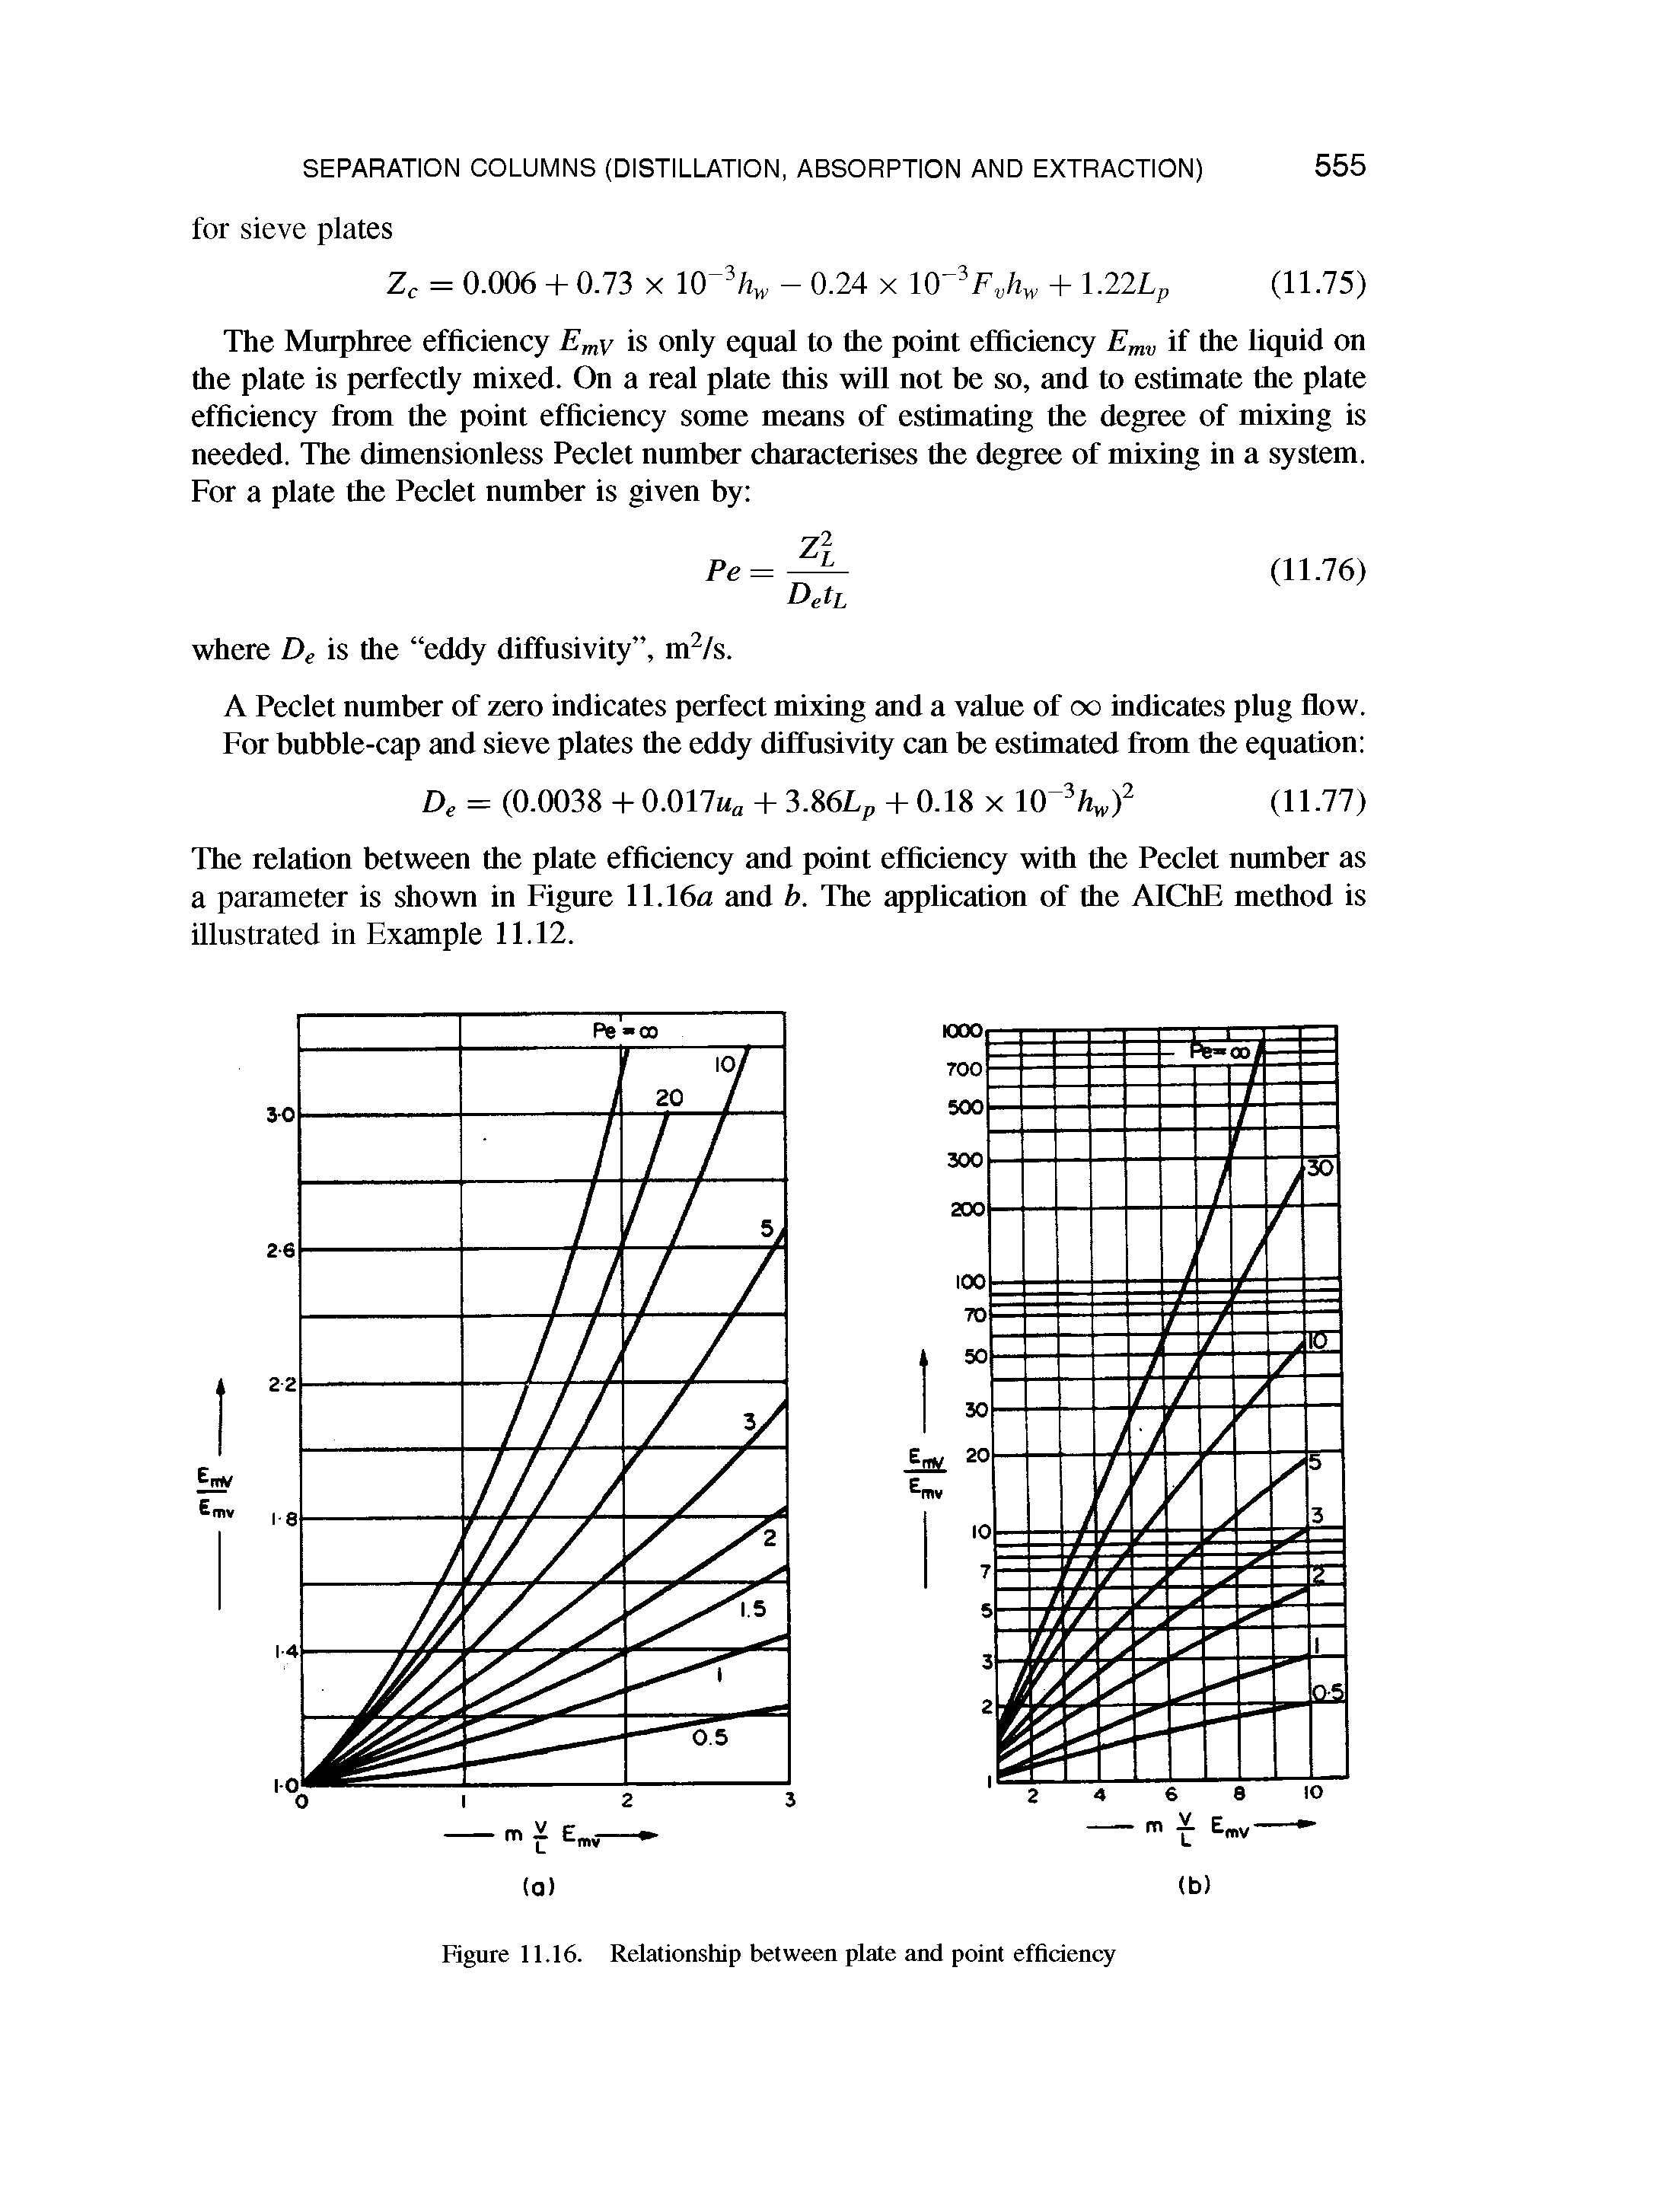 Figure 11.16. Relationship between plate and point efficiency...